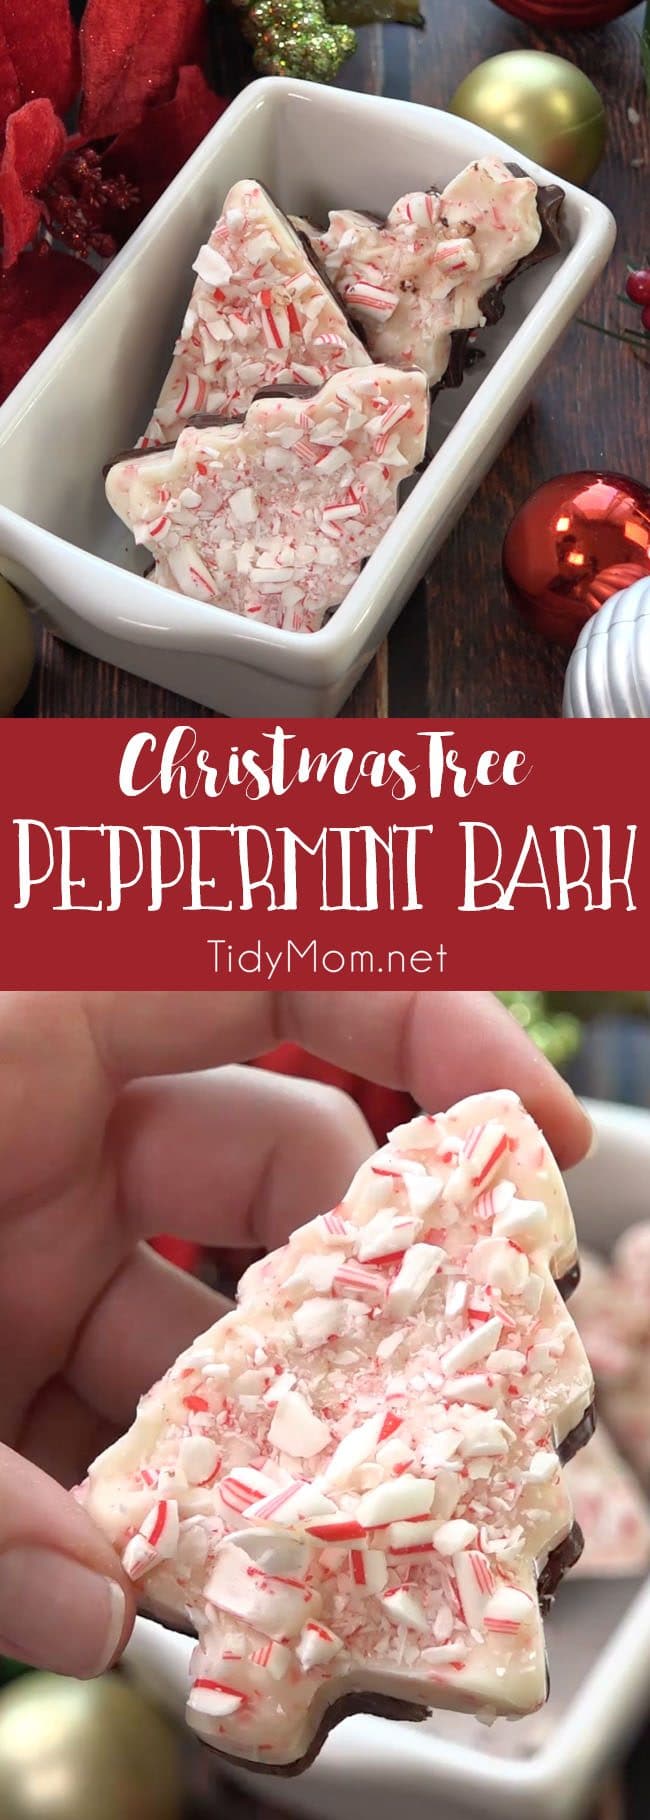 Peppermint bark is ridiculously easy to make.Use cookie cutters for Christmas Tree Peppermint Bark and you have an indulgent luxurious looking treat that’s great for gifting! Get directions and recipe at TidyMom.net 